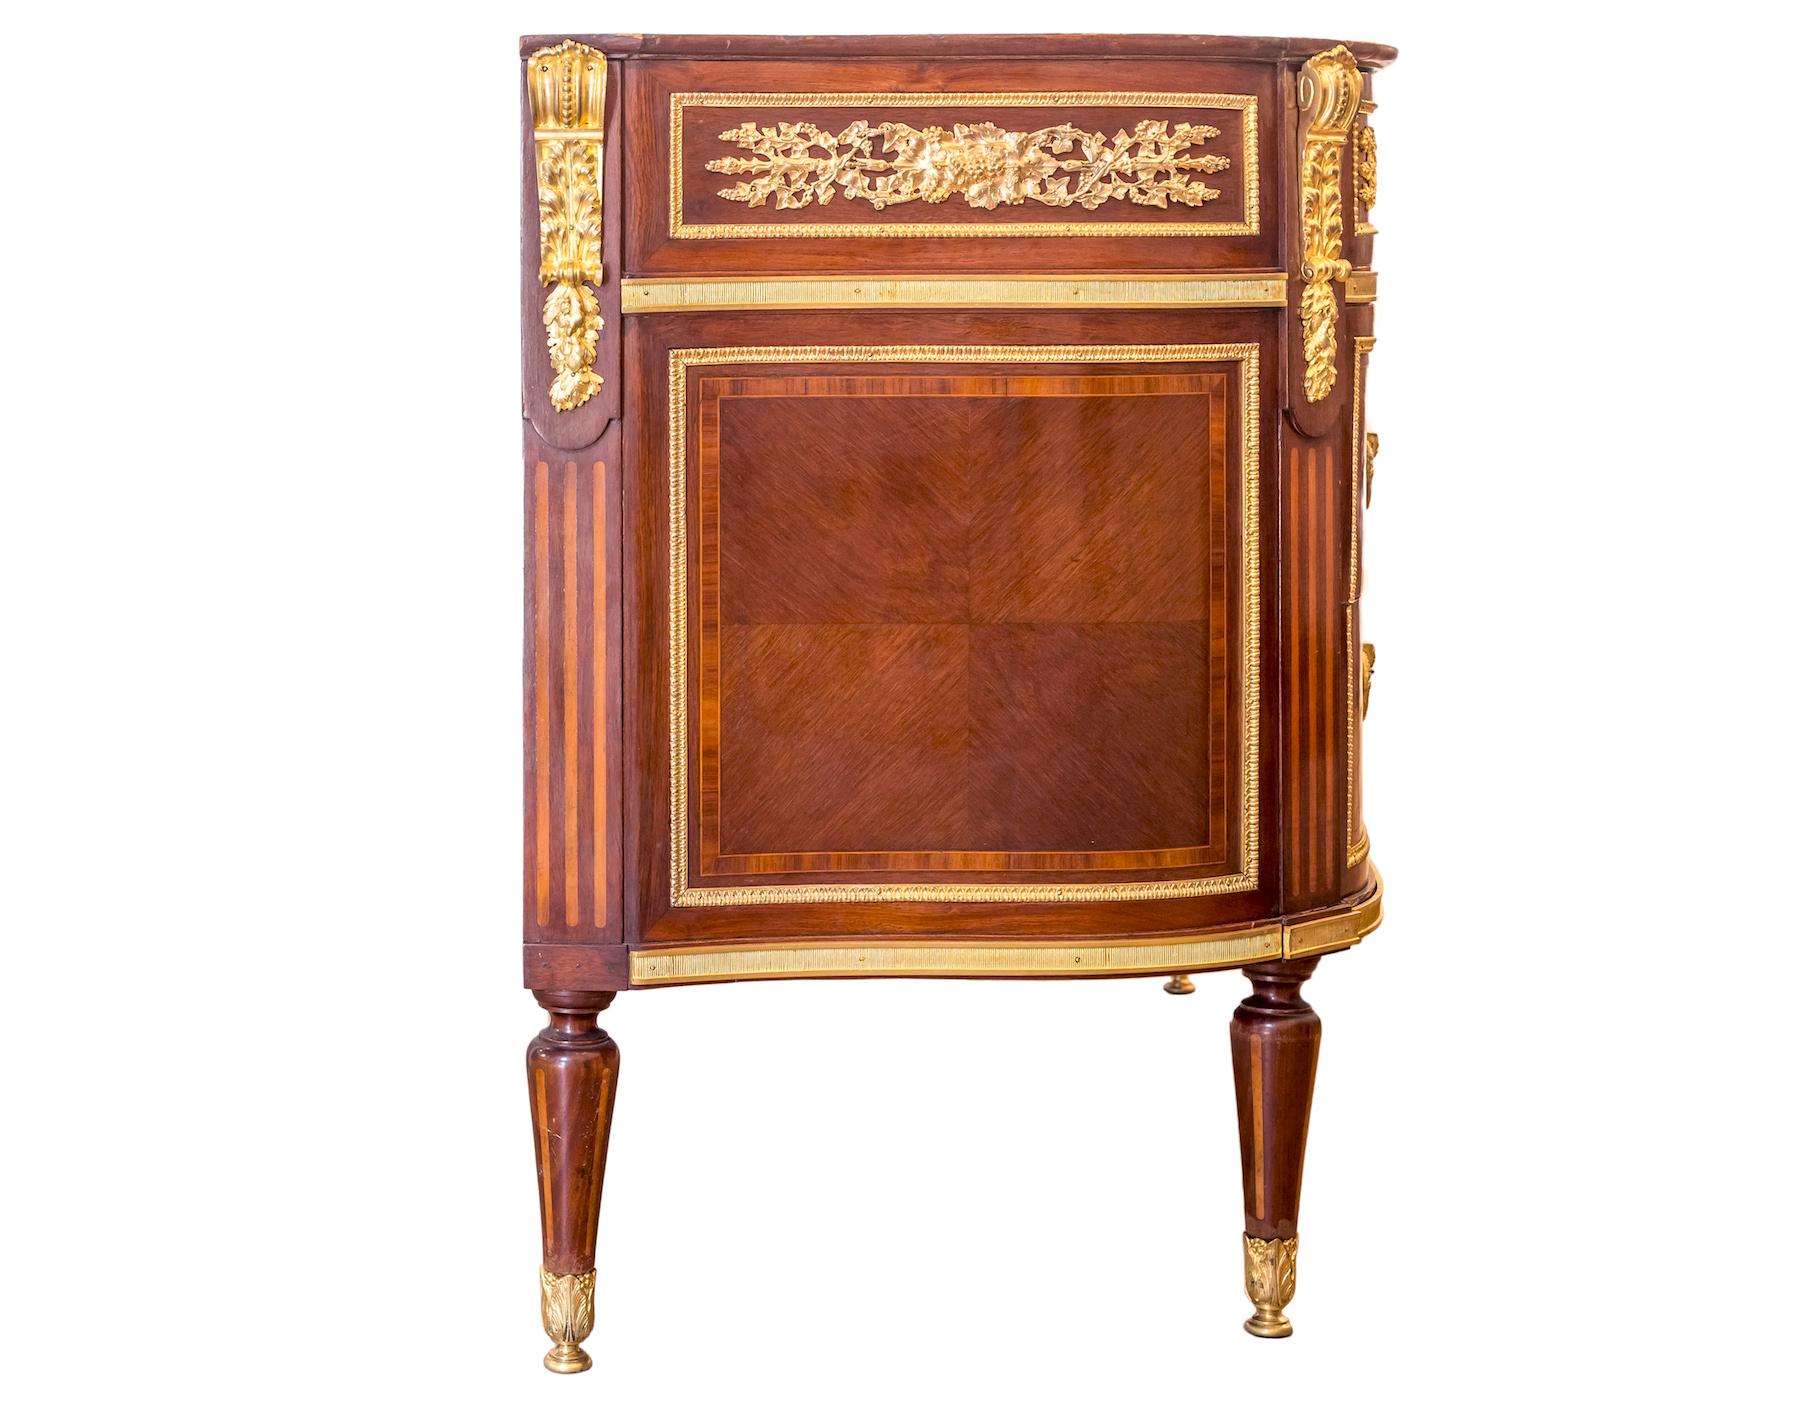 Louis XVI style commode in rectangular shape, slightly bulged with curved flanks in veneered mahogany and boxwood, standing on four tapered legs.
Opening with a thin drawer in the apron and two other drawers without stretcher in facade, flanked by